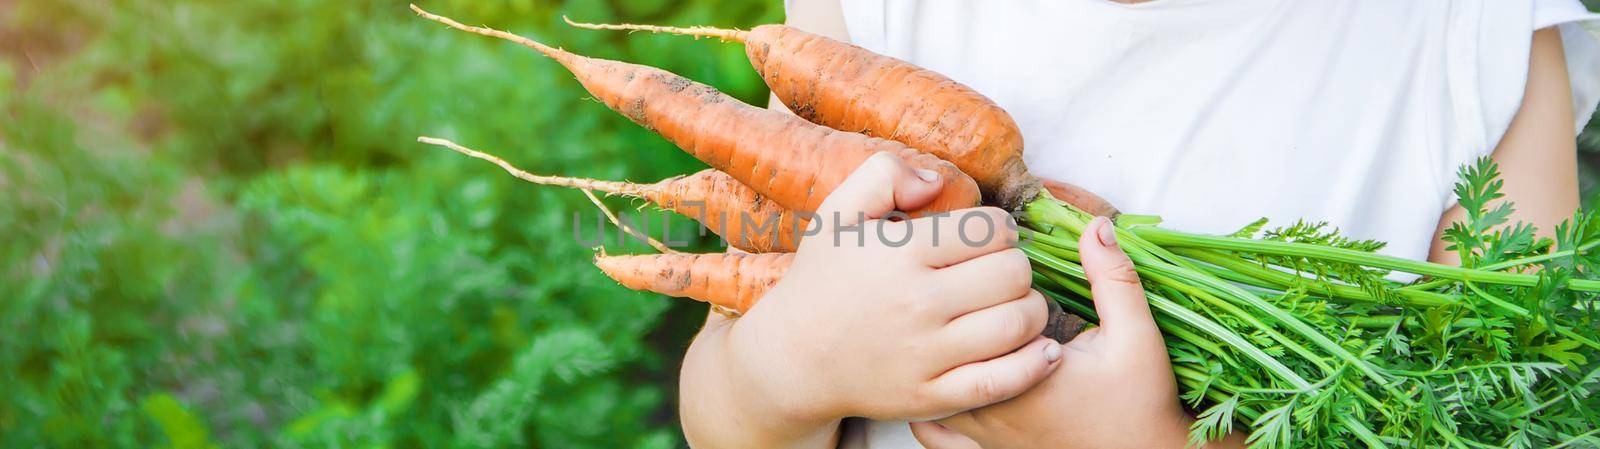 organic homemade vegetables harvest carrots and beets